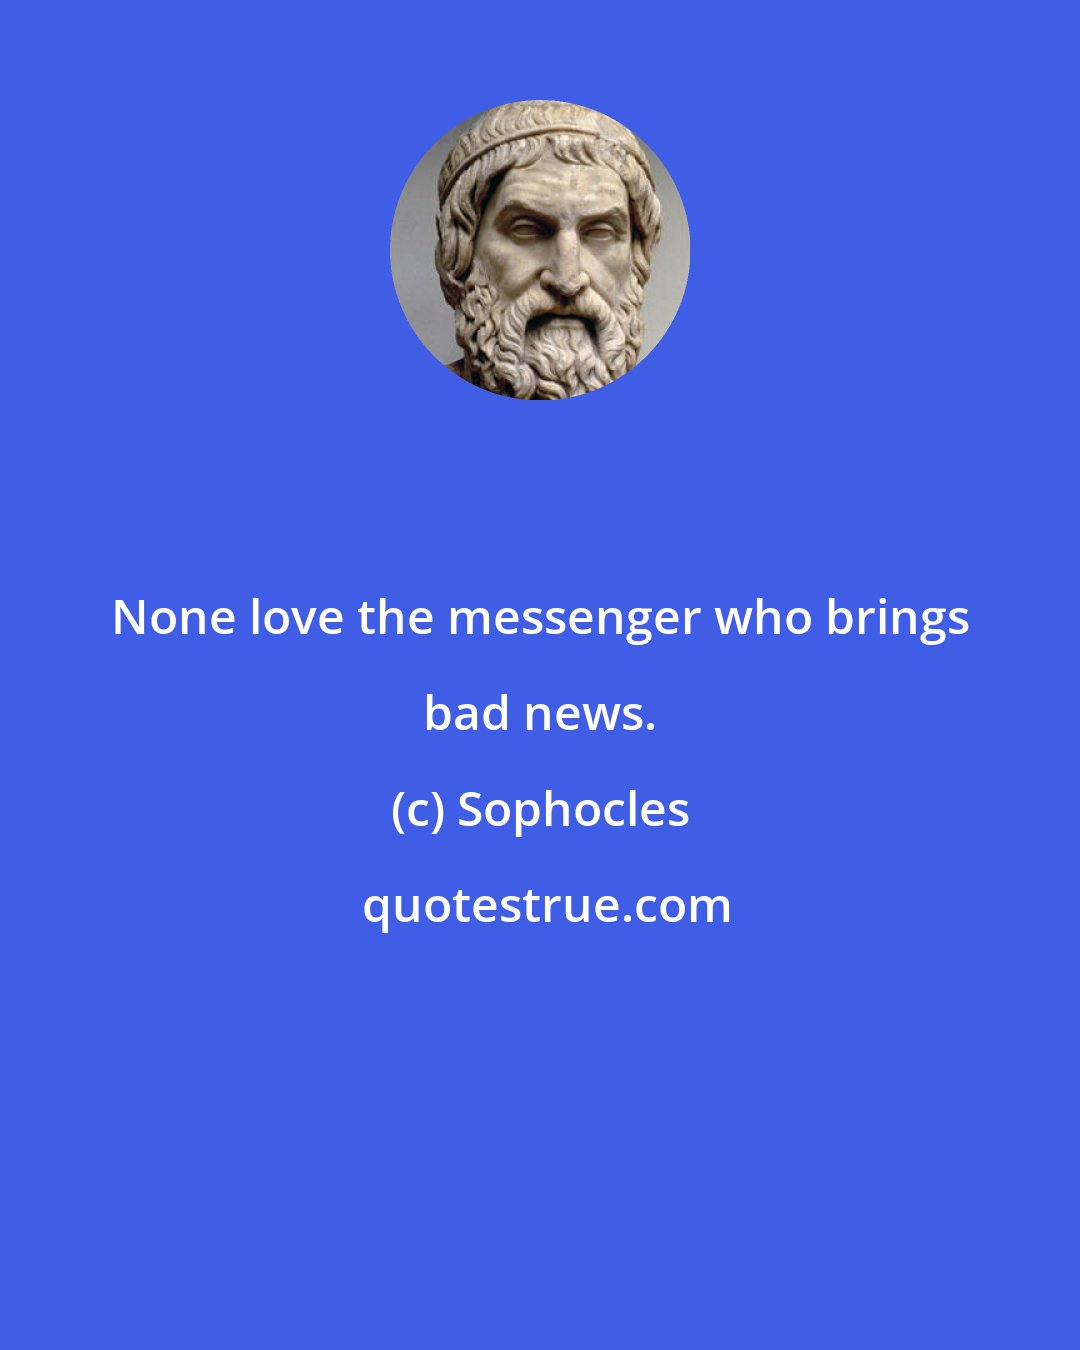 Sophocles: None love the messenger who brings bad news.